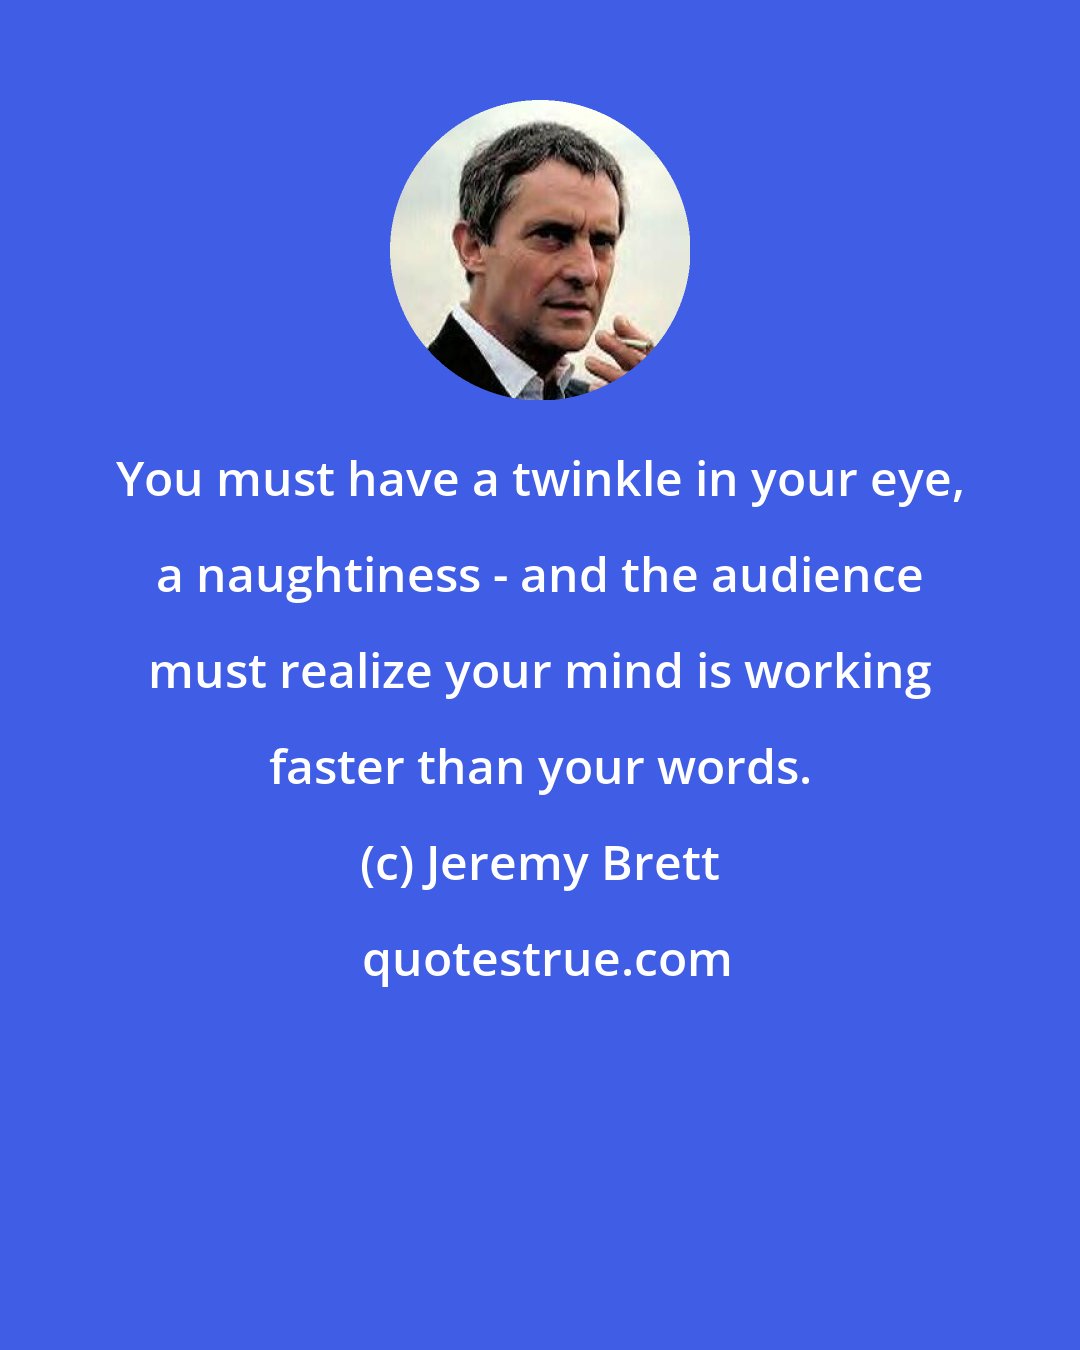 Jeremy Brett: You must have a twinkle in your eye, a naughtiness - and the audience must realize your mind is working faster than your words.